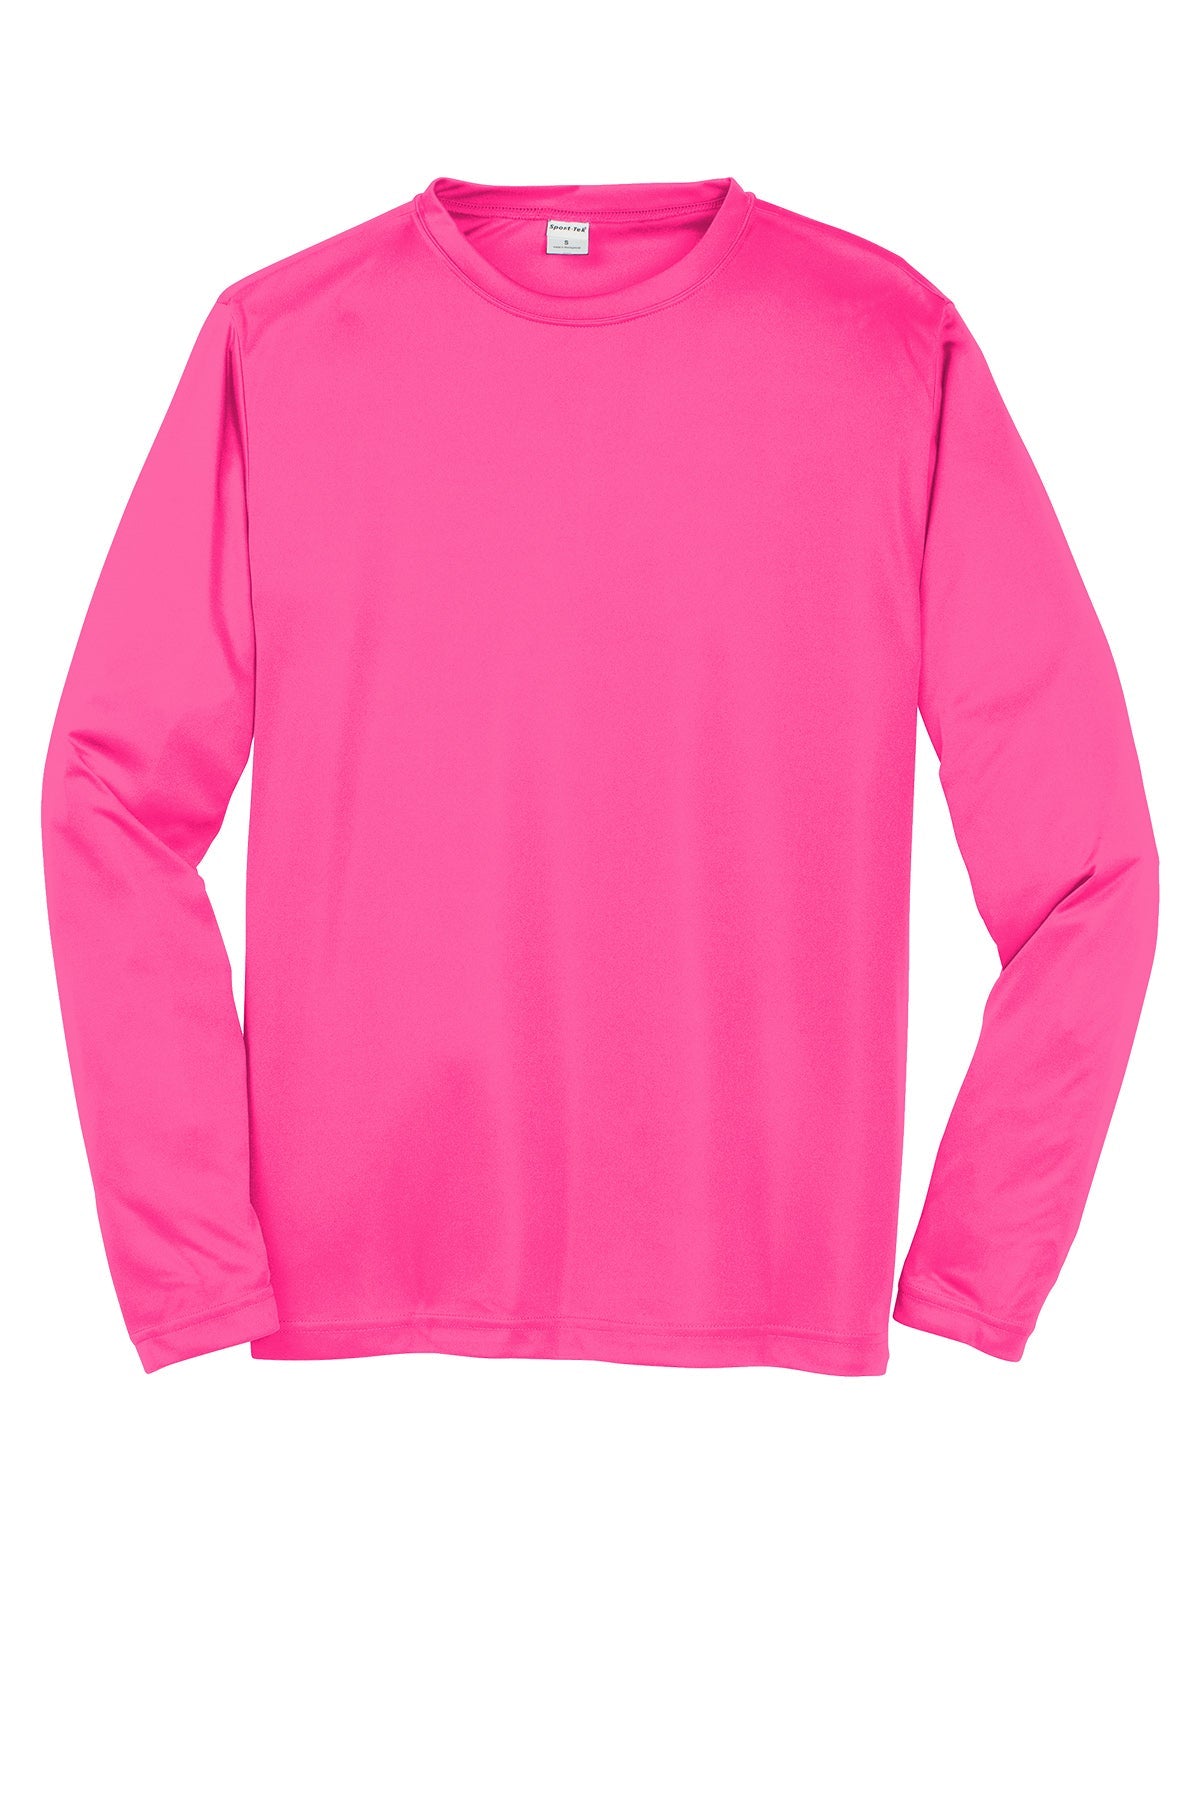 Sport-Tek St350Ls Polyester Adult Long Sleeve T-Shirt Ad Small / Neon Pink